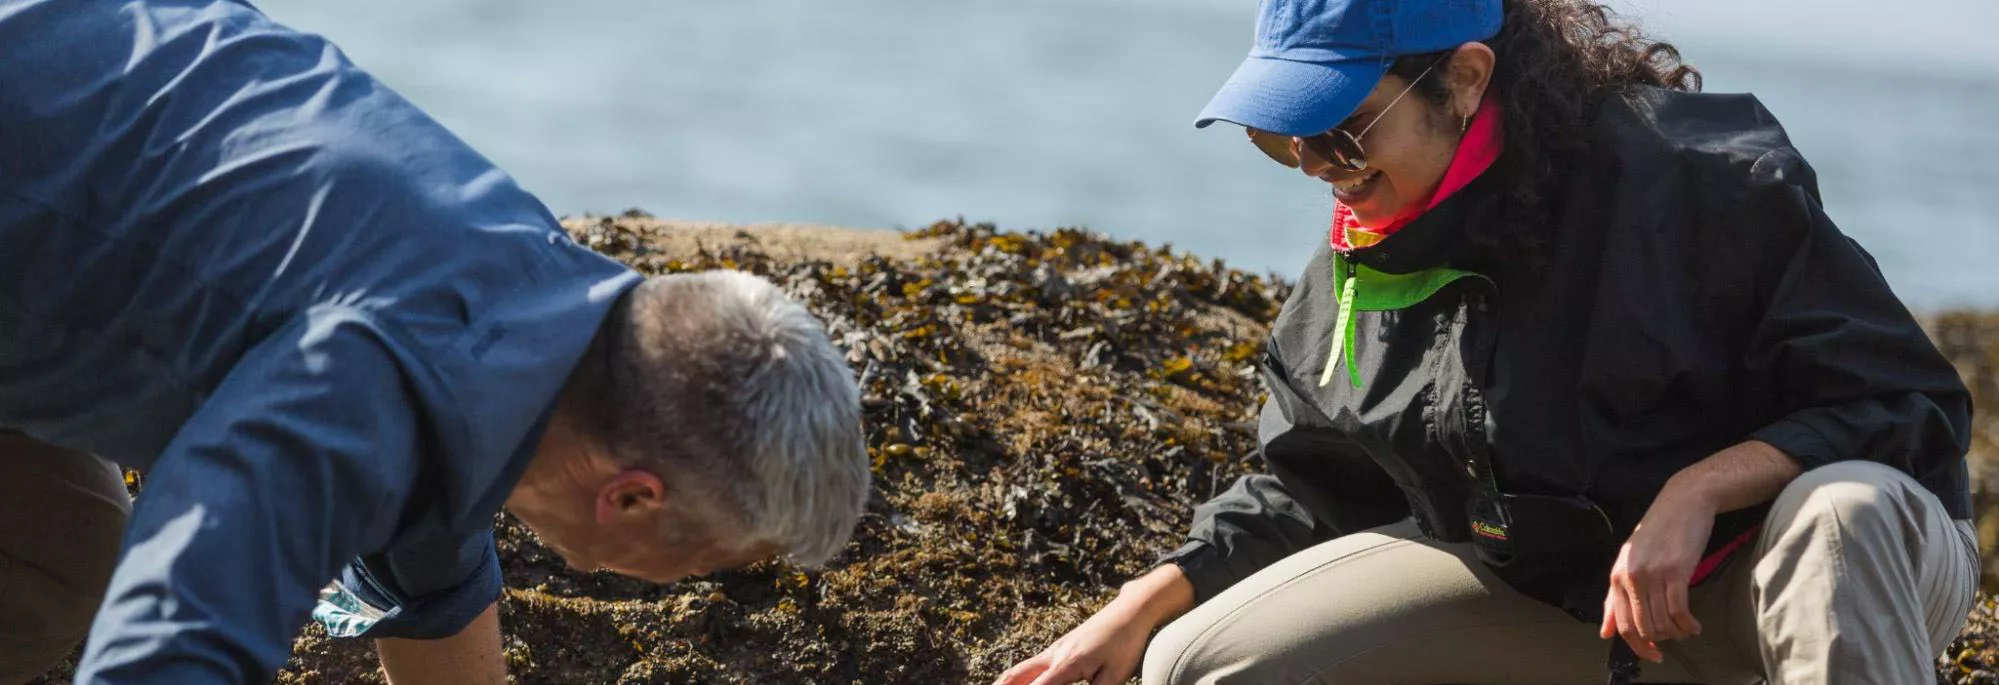 Two people gazing into a tidepool